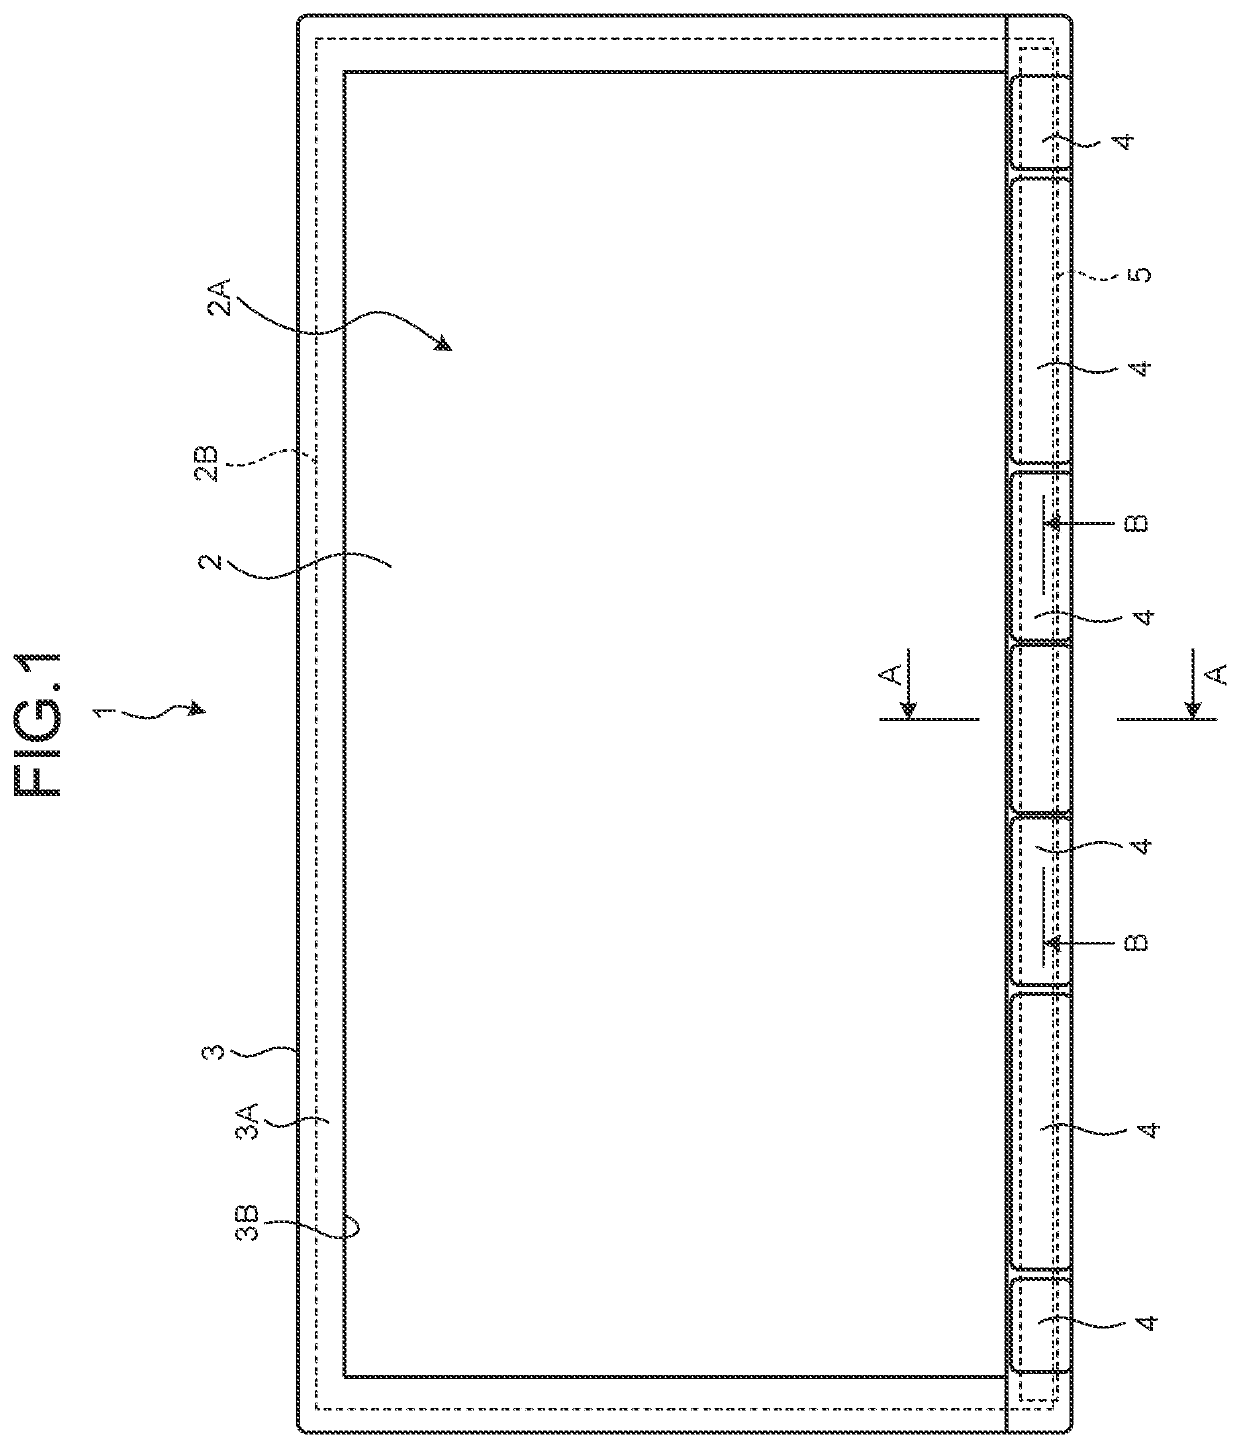 Hinge structure of button and electronic device